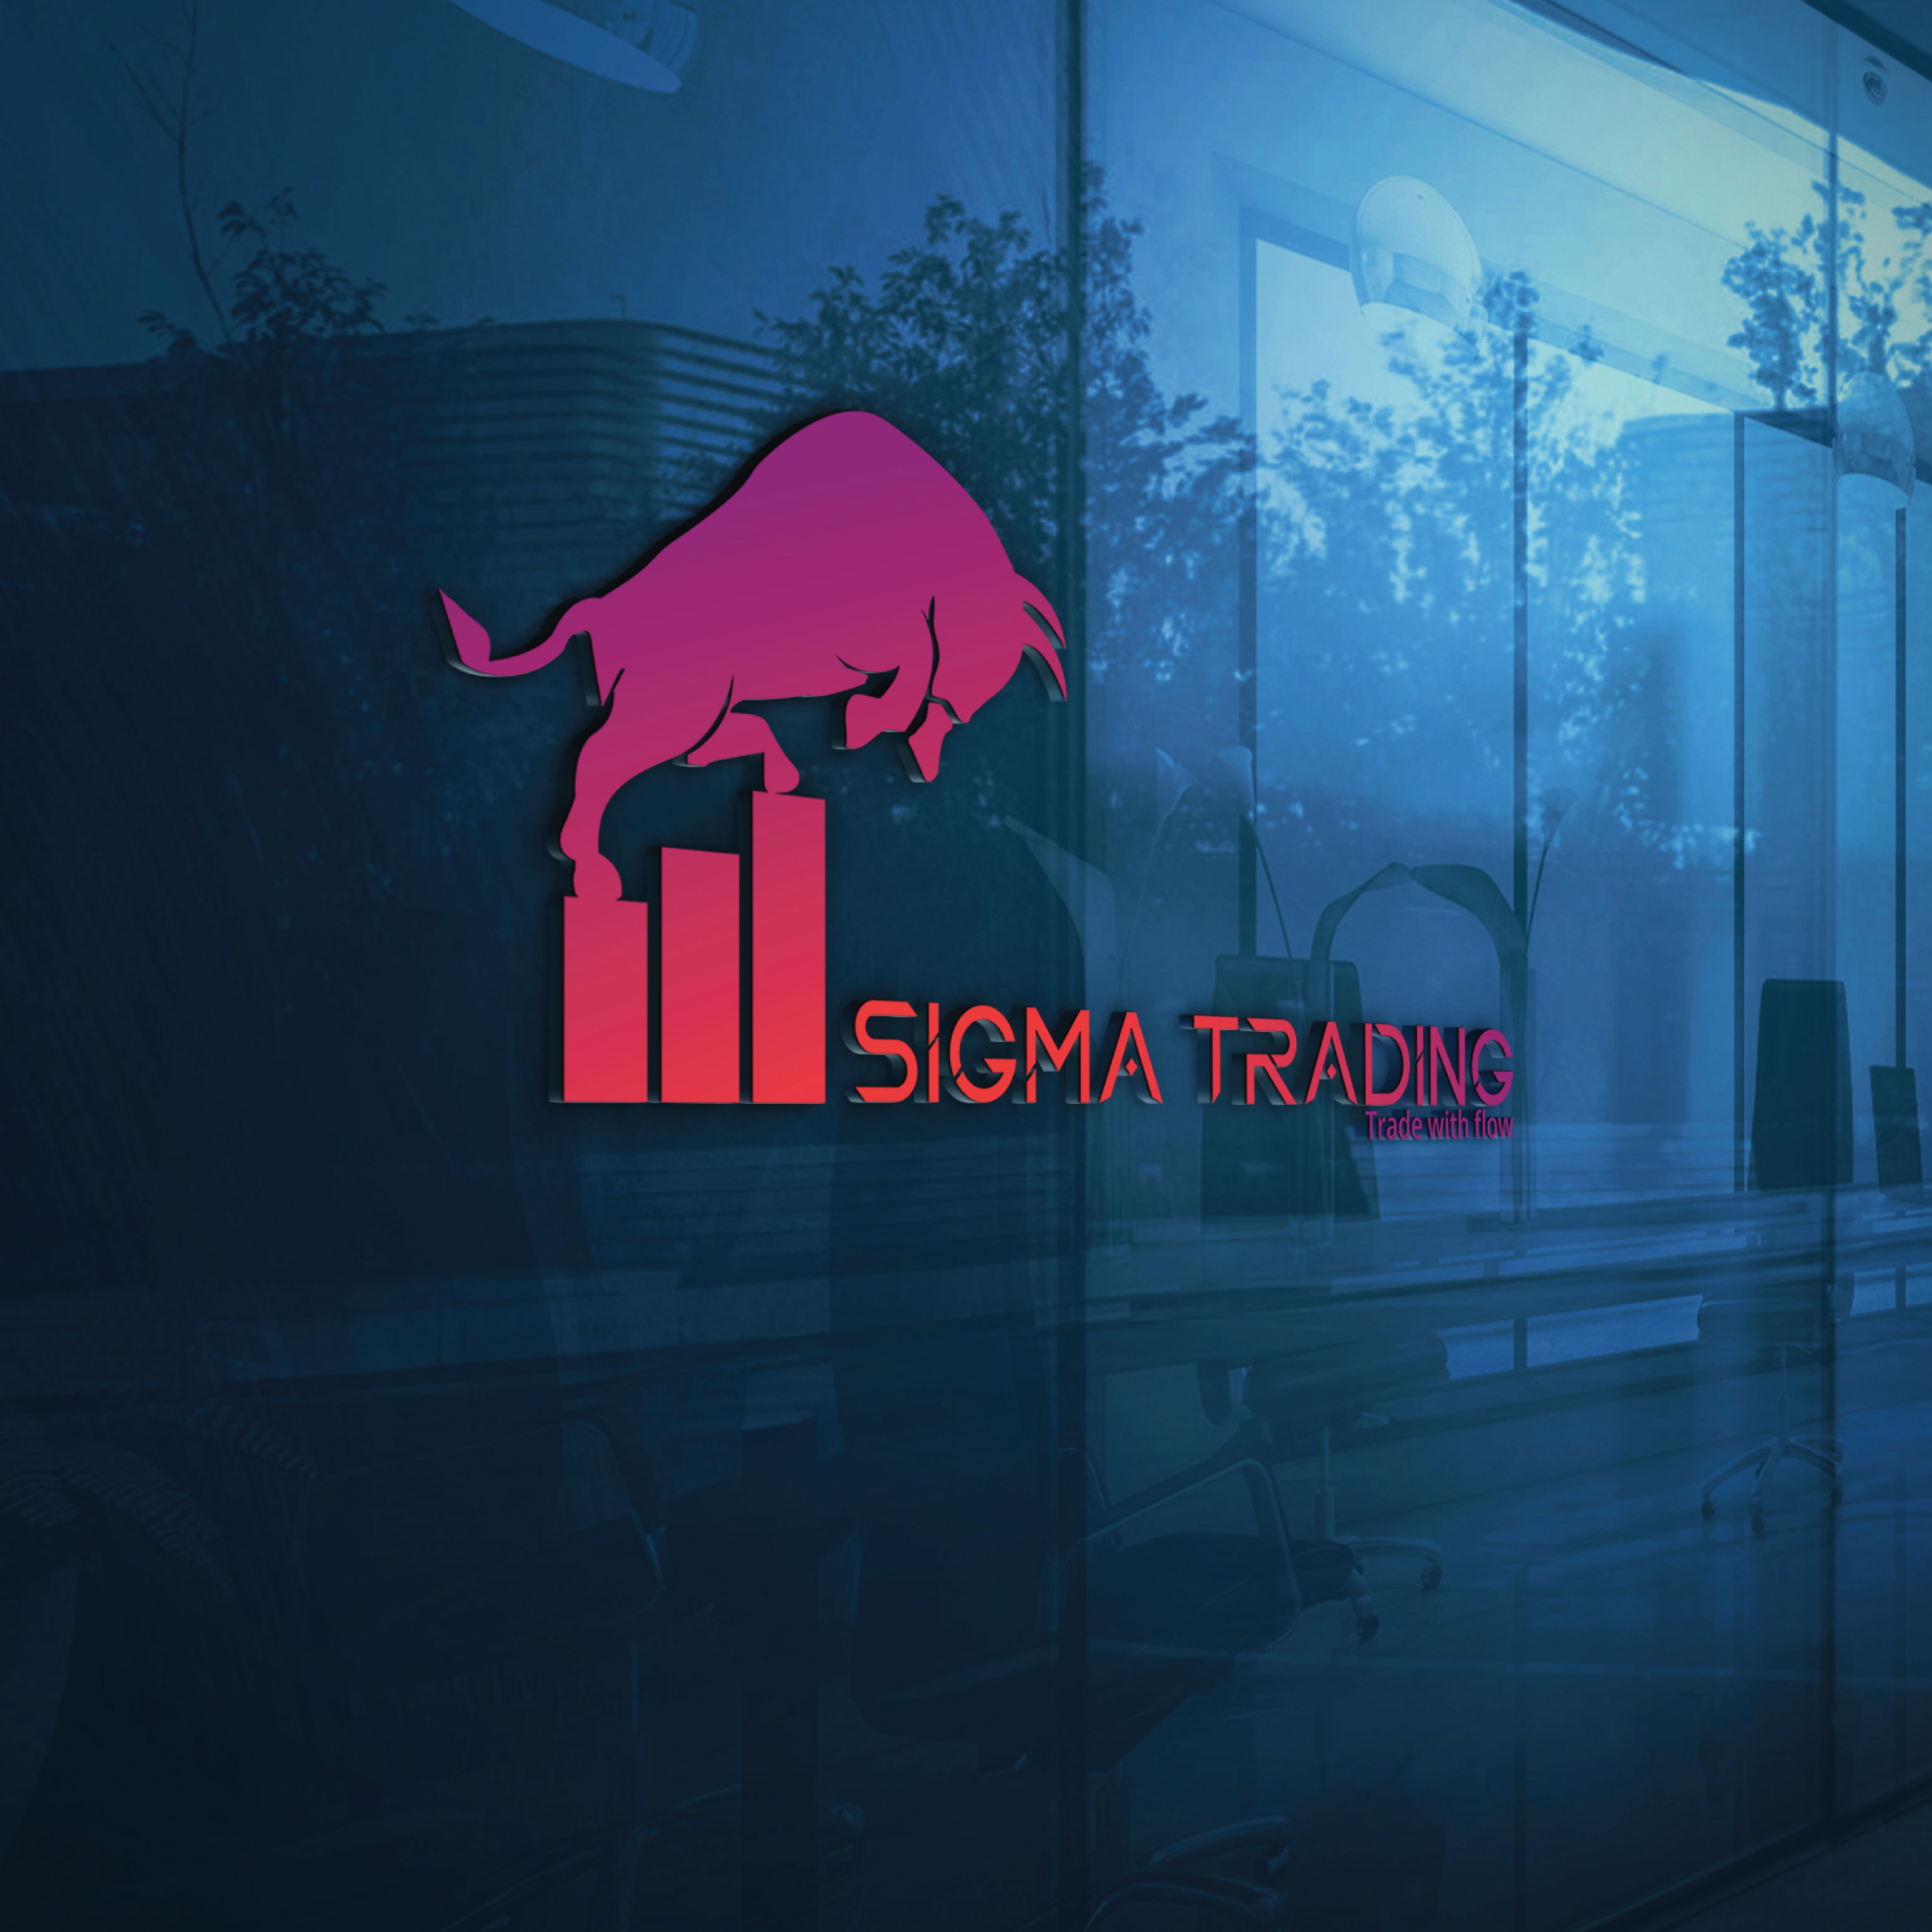 Trading logo for your company (Sigma trading) preview image.